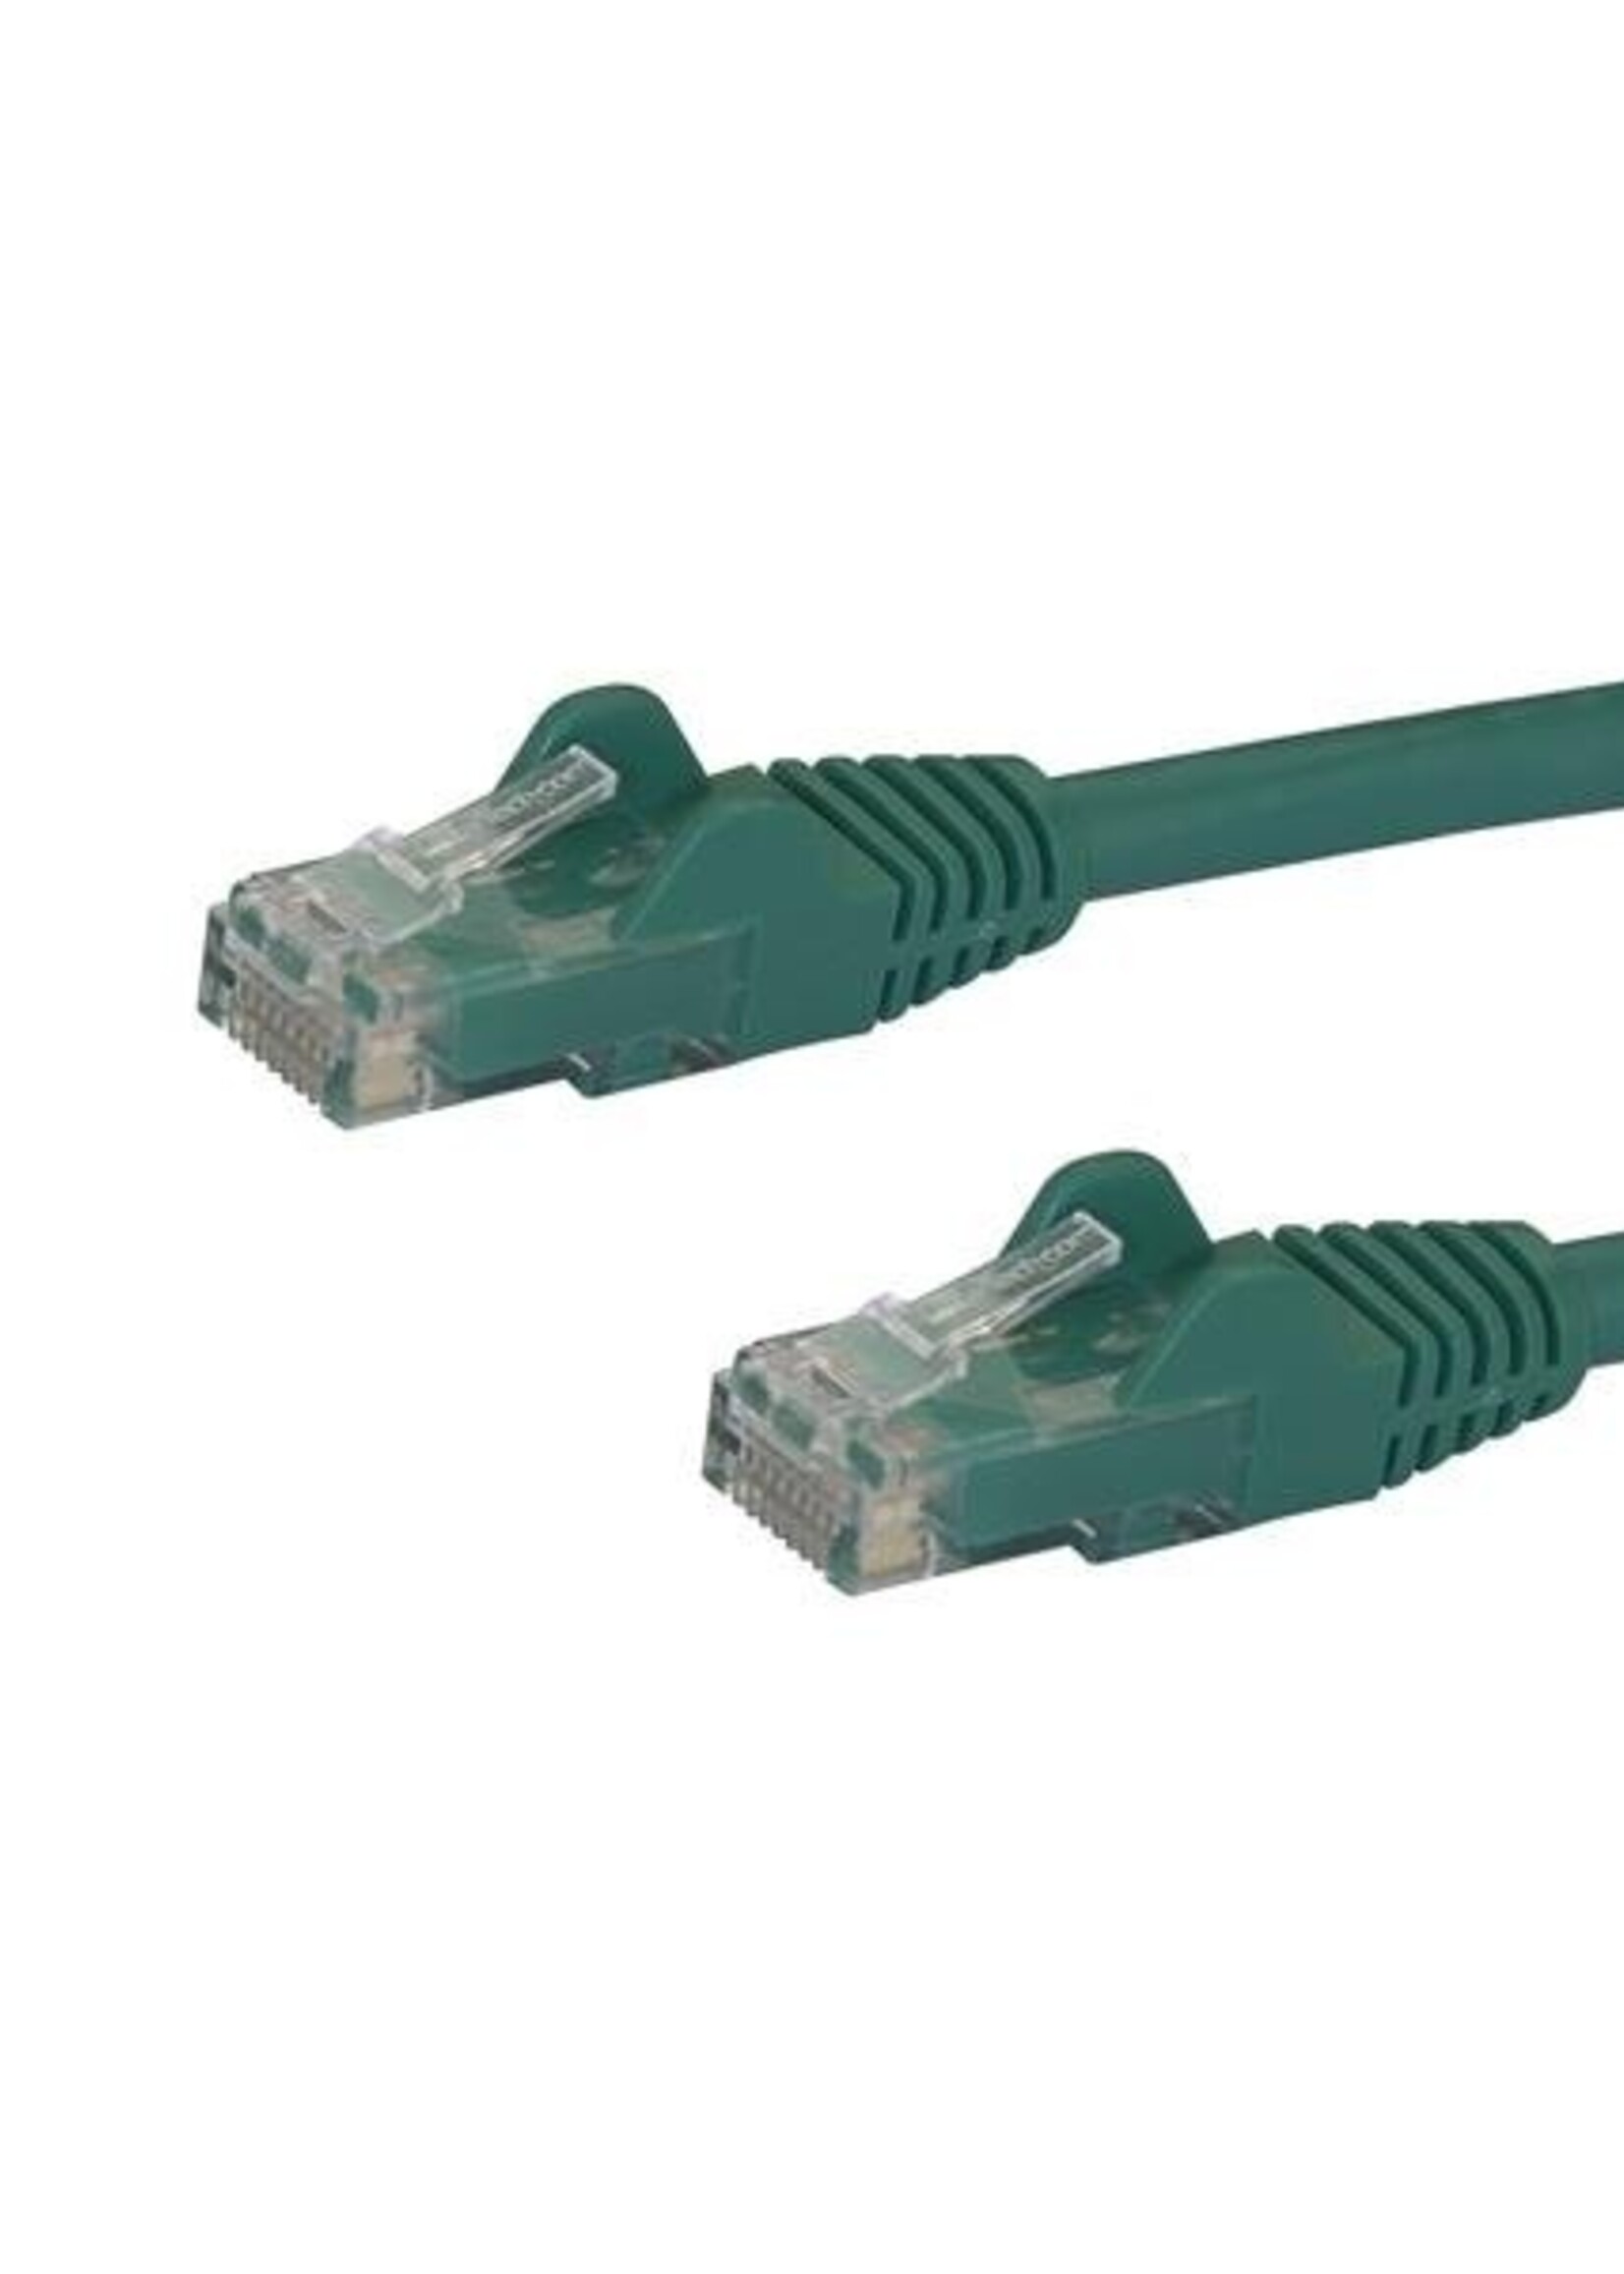 1m Green Snagless UTP Cat6 Patch Cable